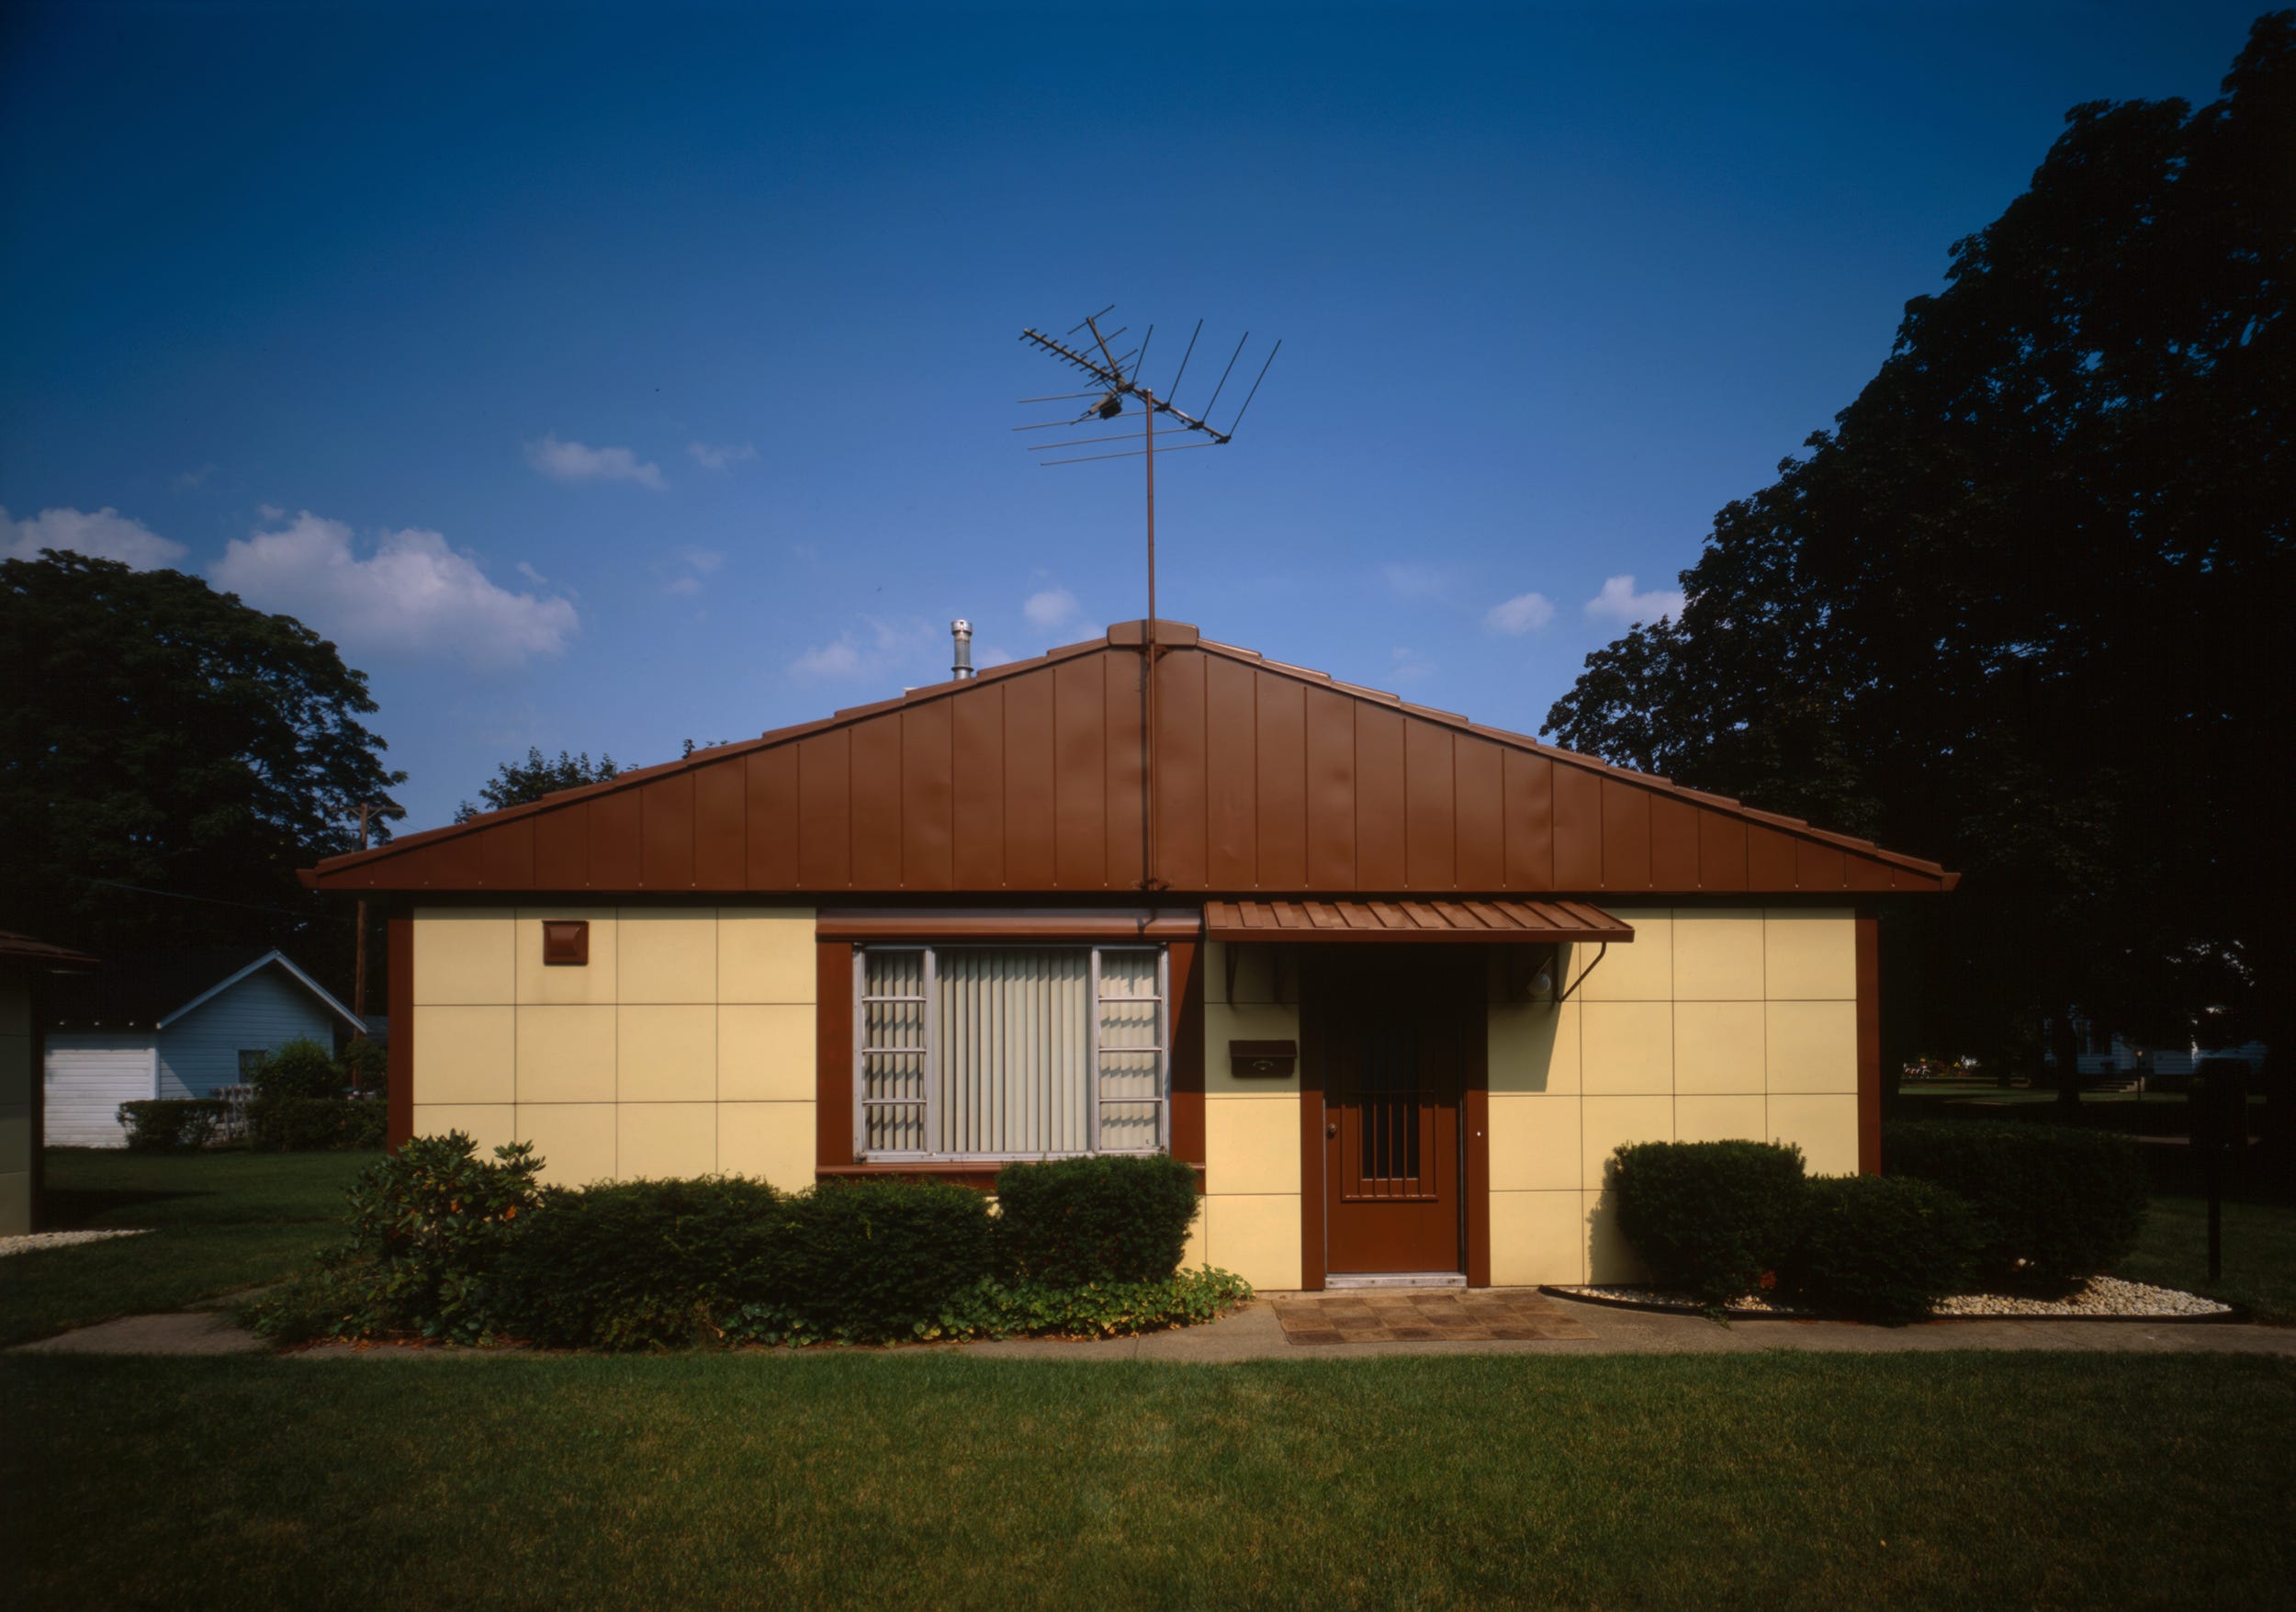 These pre-fab homes were one of the federal governments dumbest postwar mistakes by Stephanie Buck Timeline